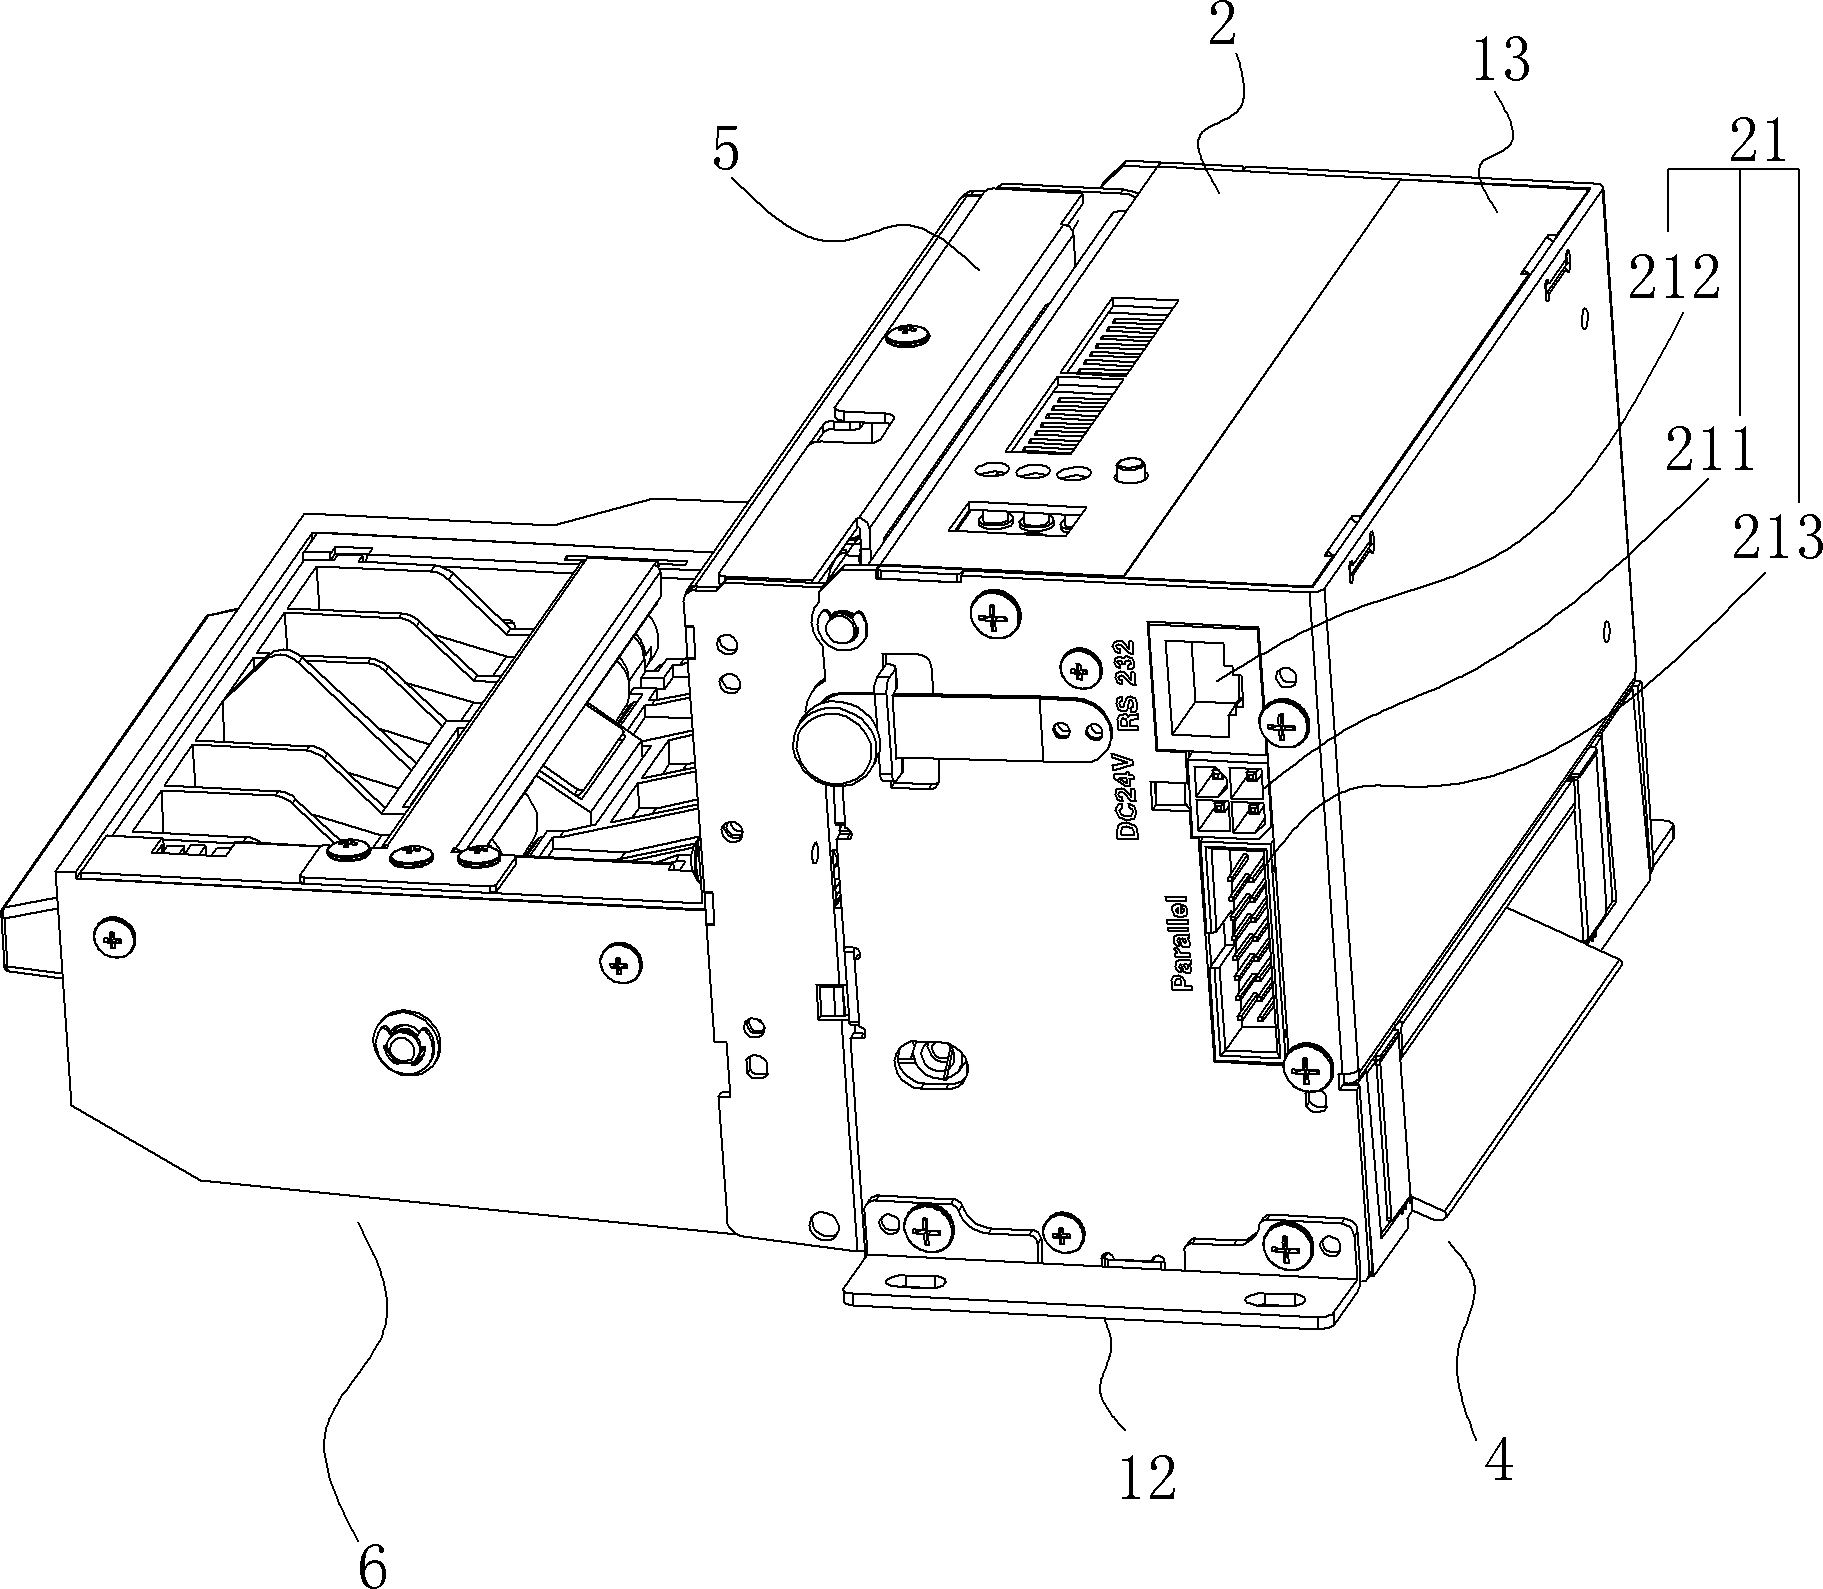 Scissors type integral cutter structure and printing device